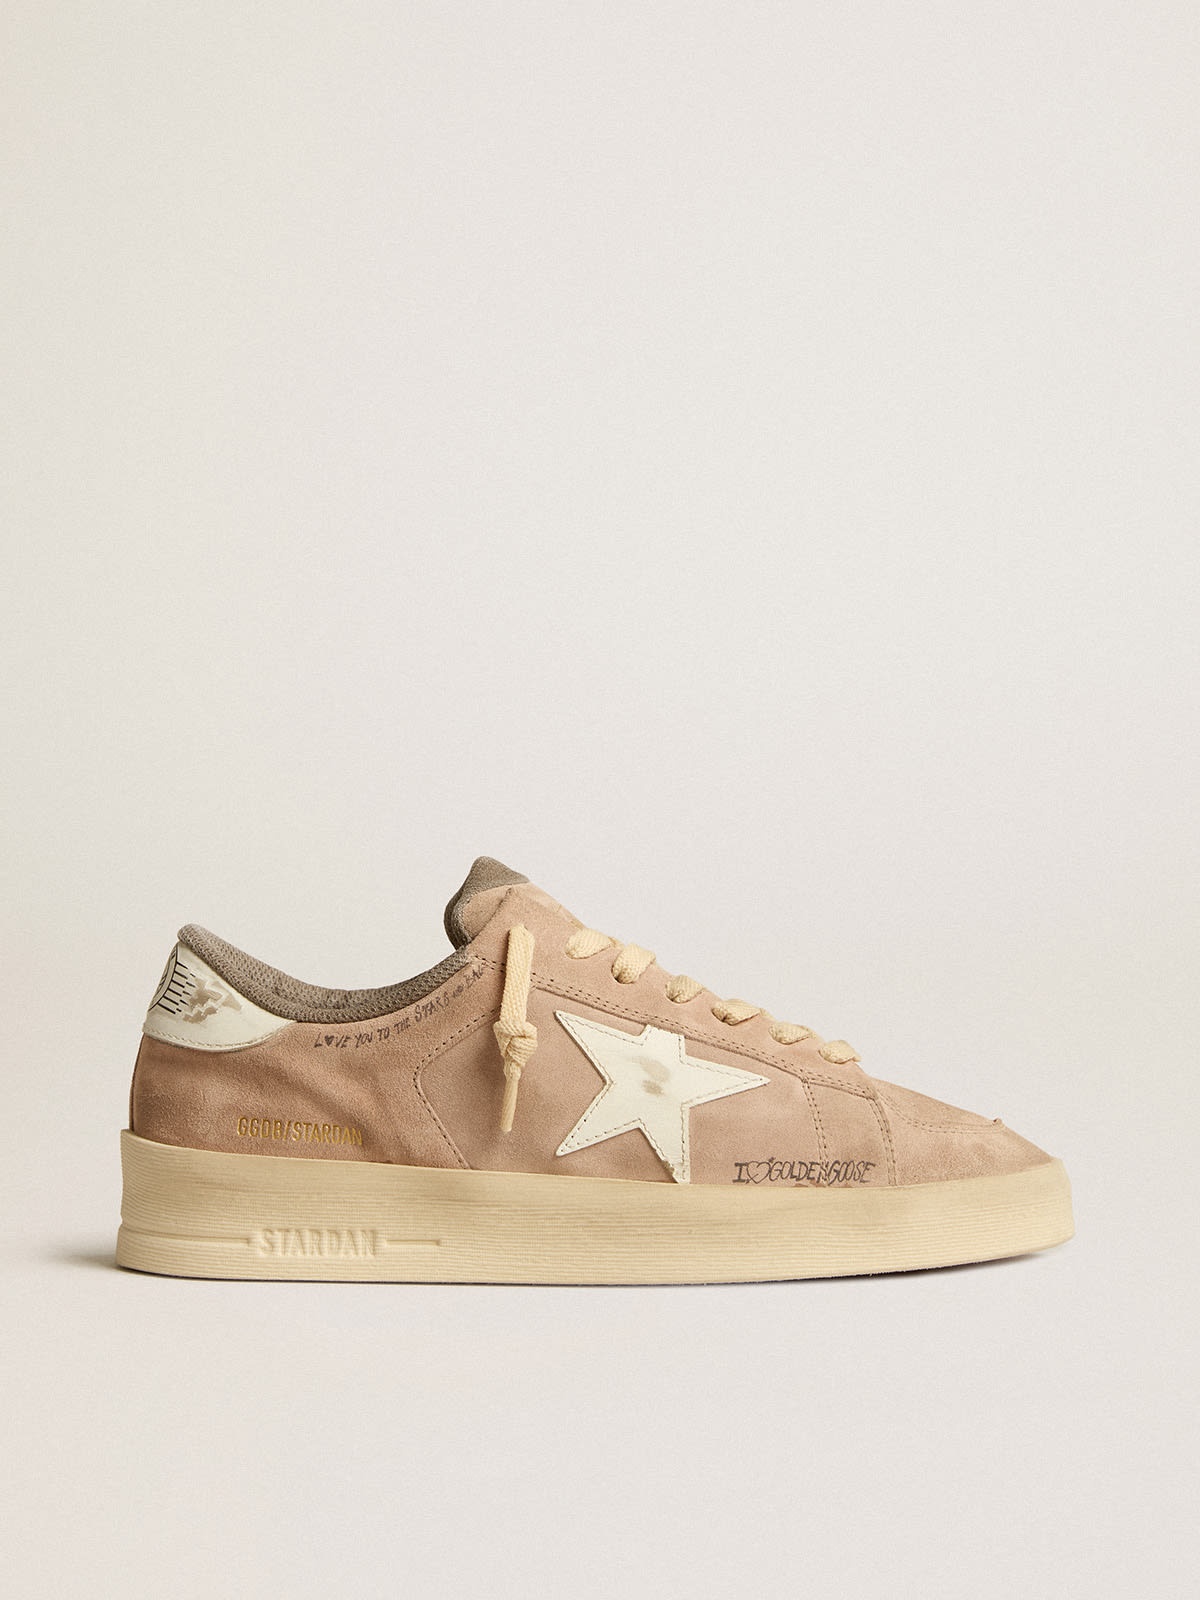 Stardan in old rose suede with white leather star and heel tab - 1